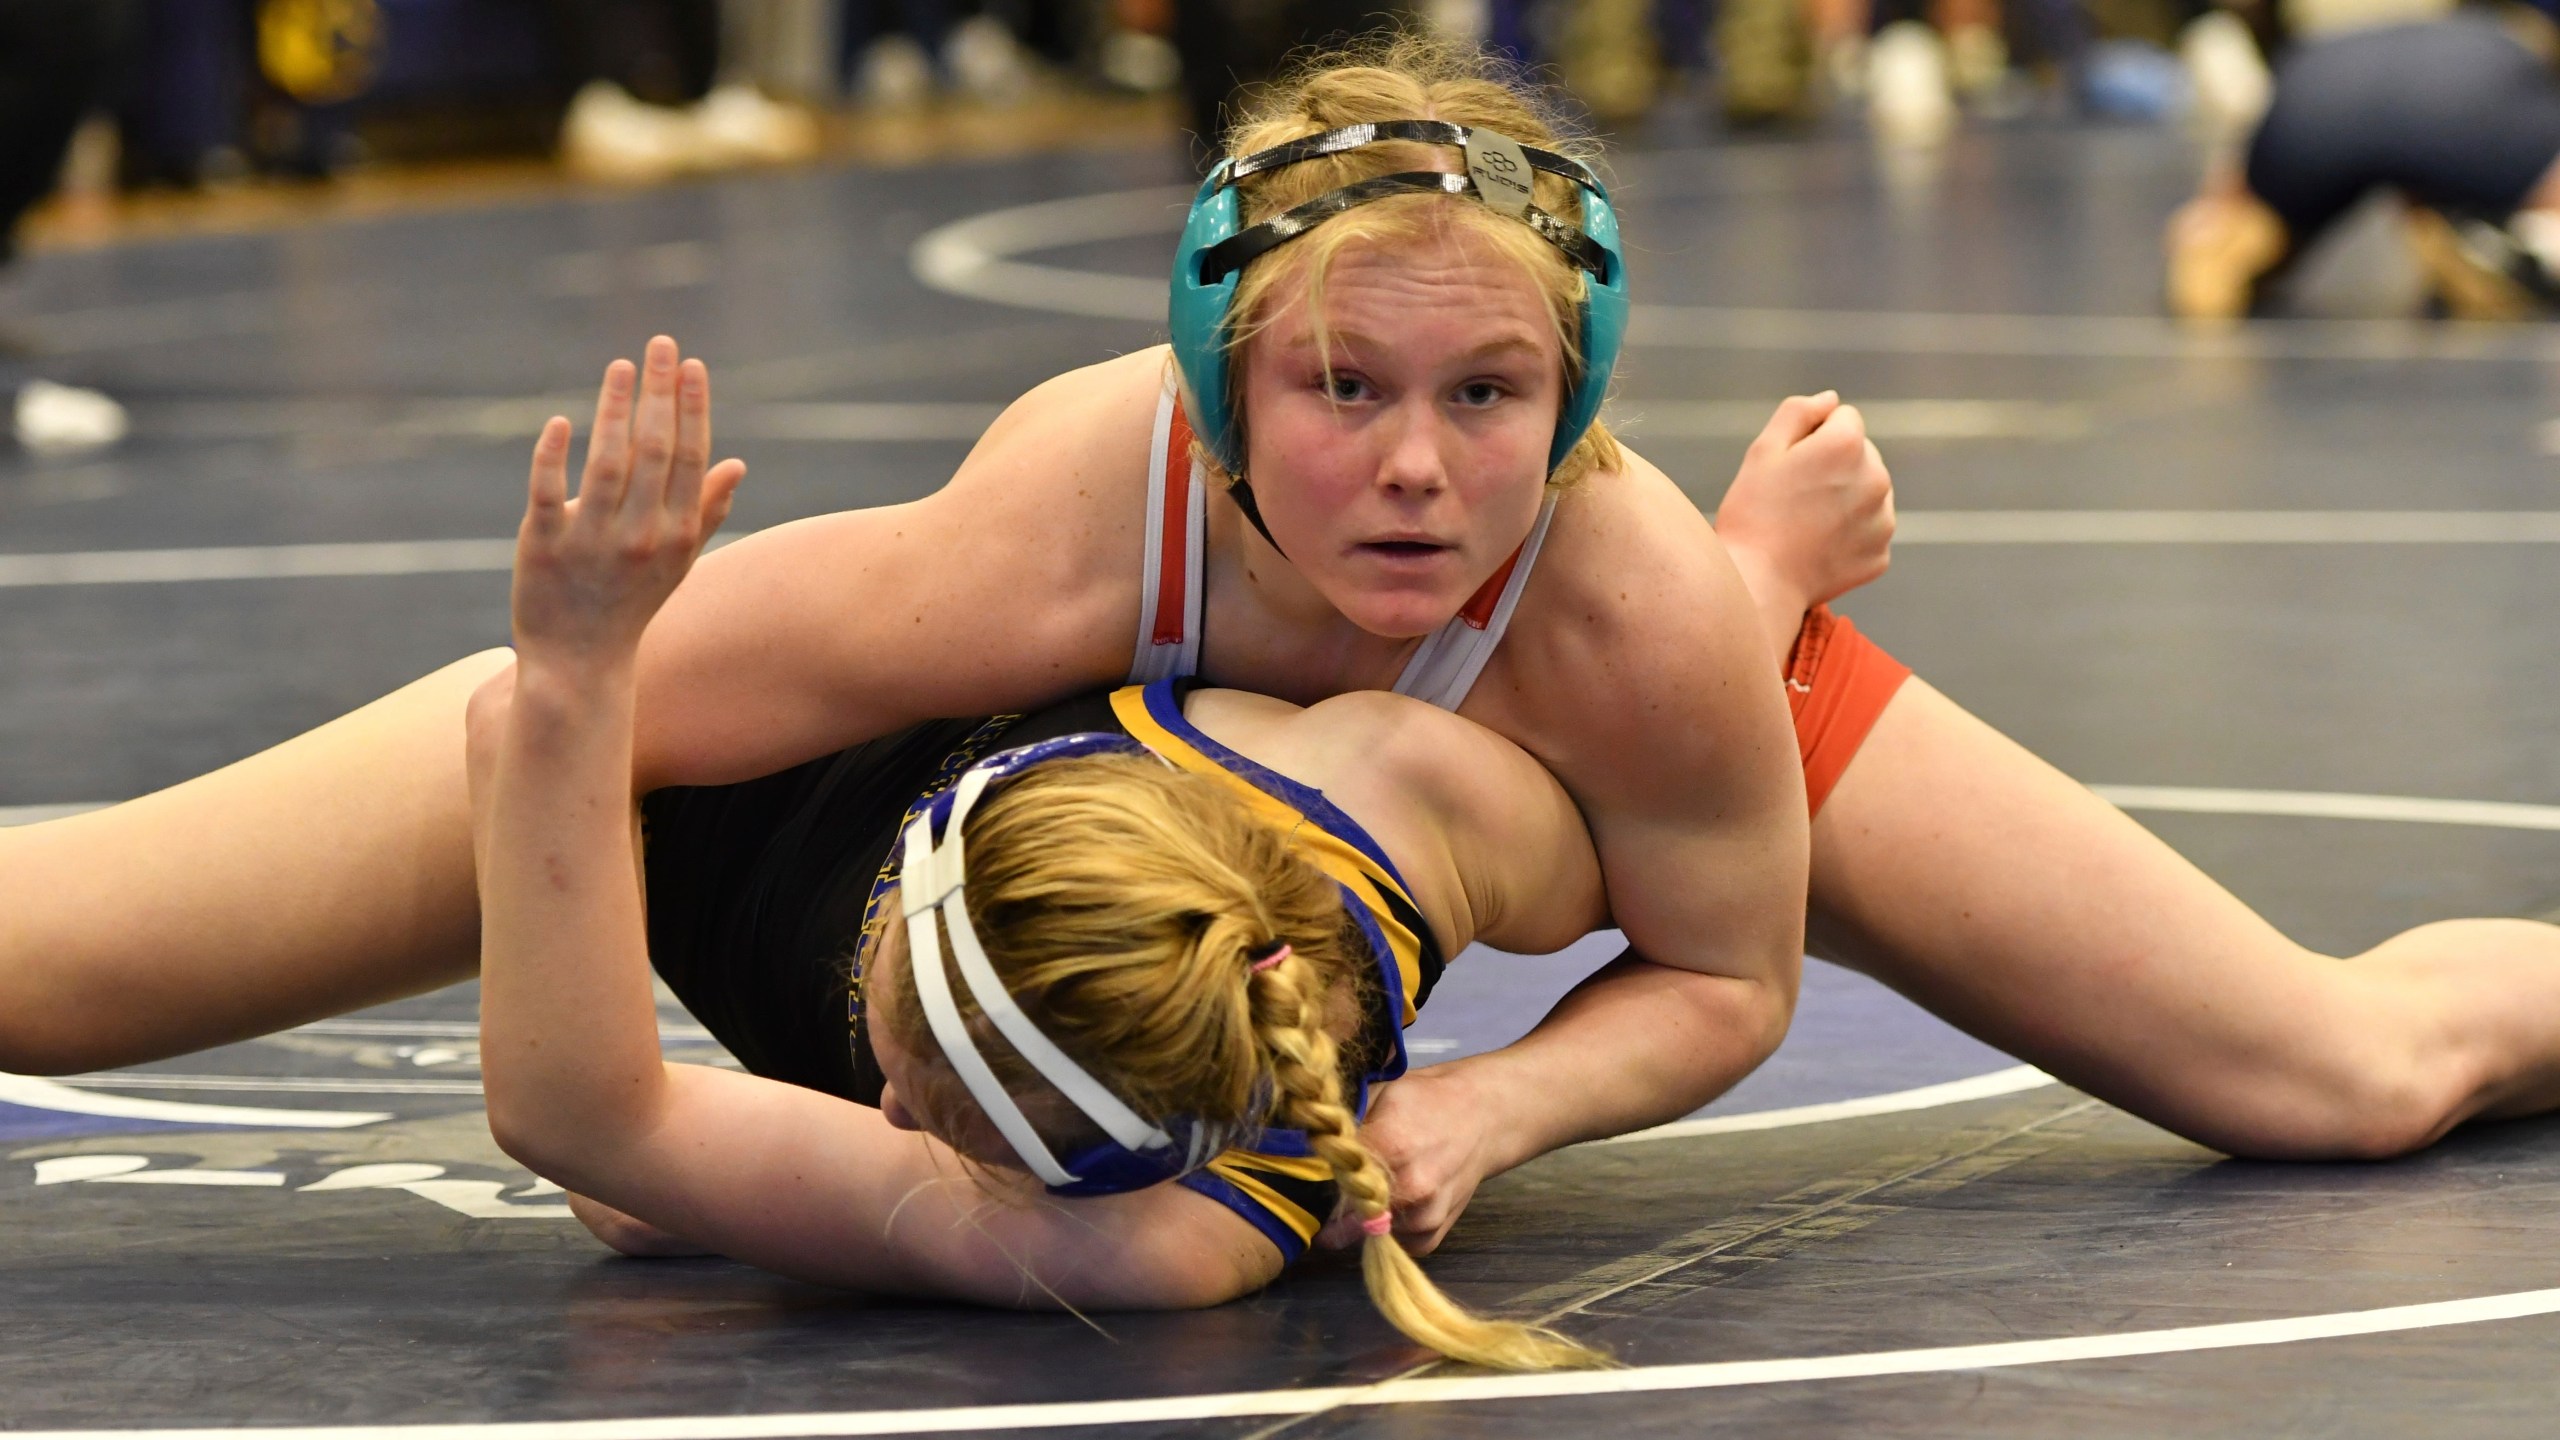 Easton Area High School wrestler Aubre Krazer, top, competes in a semifinal match during the Southeast Regional wrestling tournament Sunday, Feb. 25, 2024, in Quakertown, Pa. Girls’ wrestling has become the fastest-growing high school sport in the country. (AP Photo/Marc Levy)